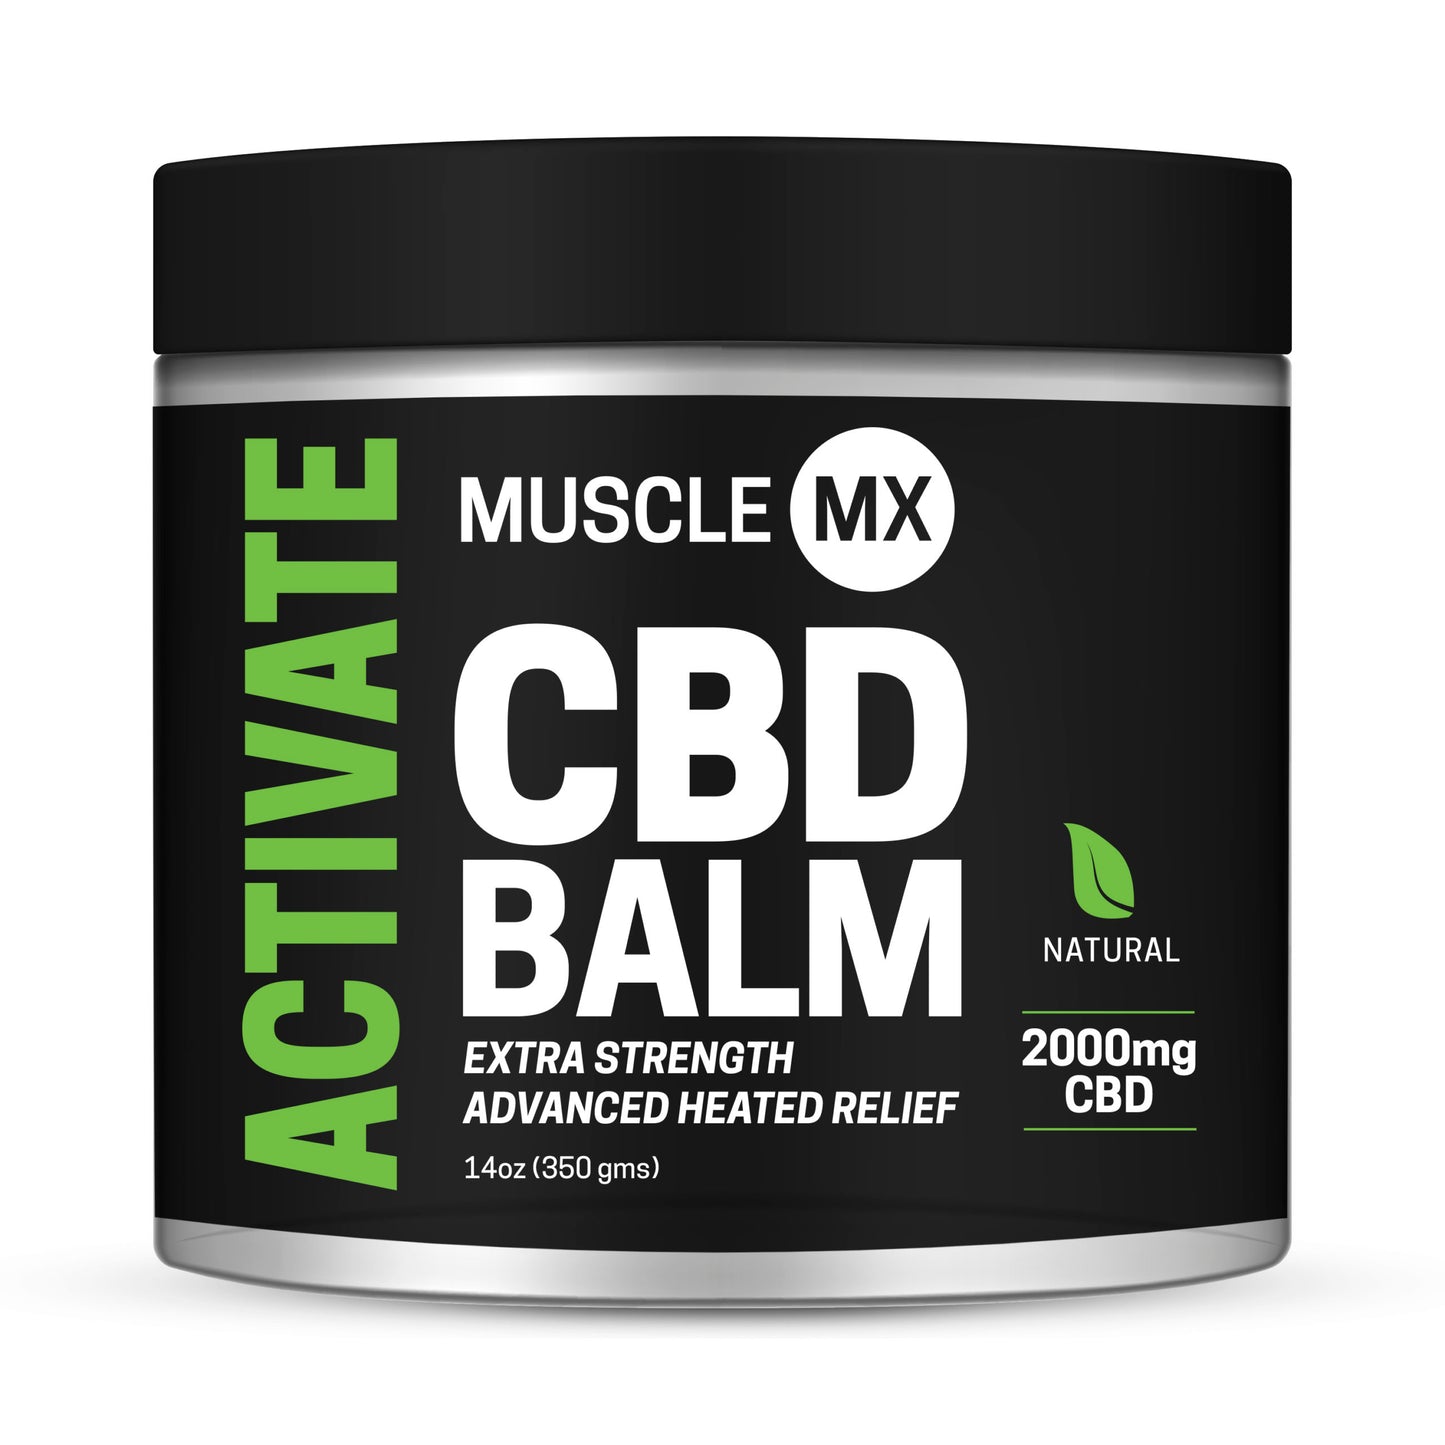 Muscle MX Activate Heating Balm 2000 mg